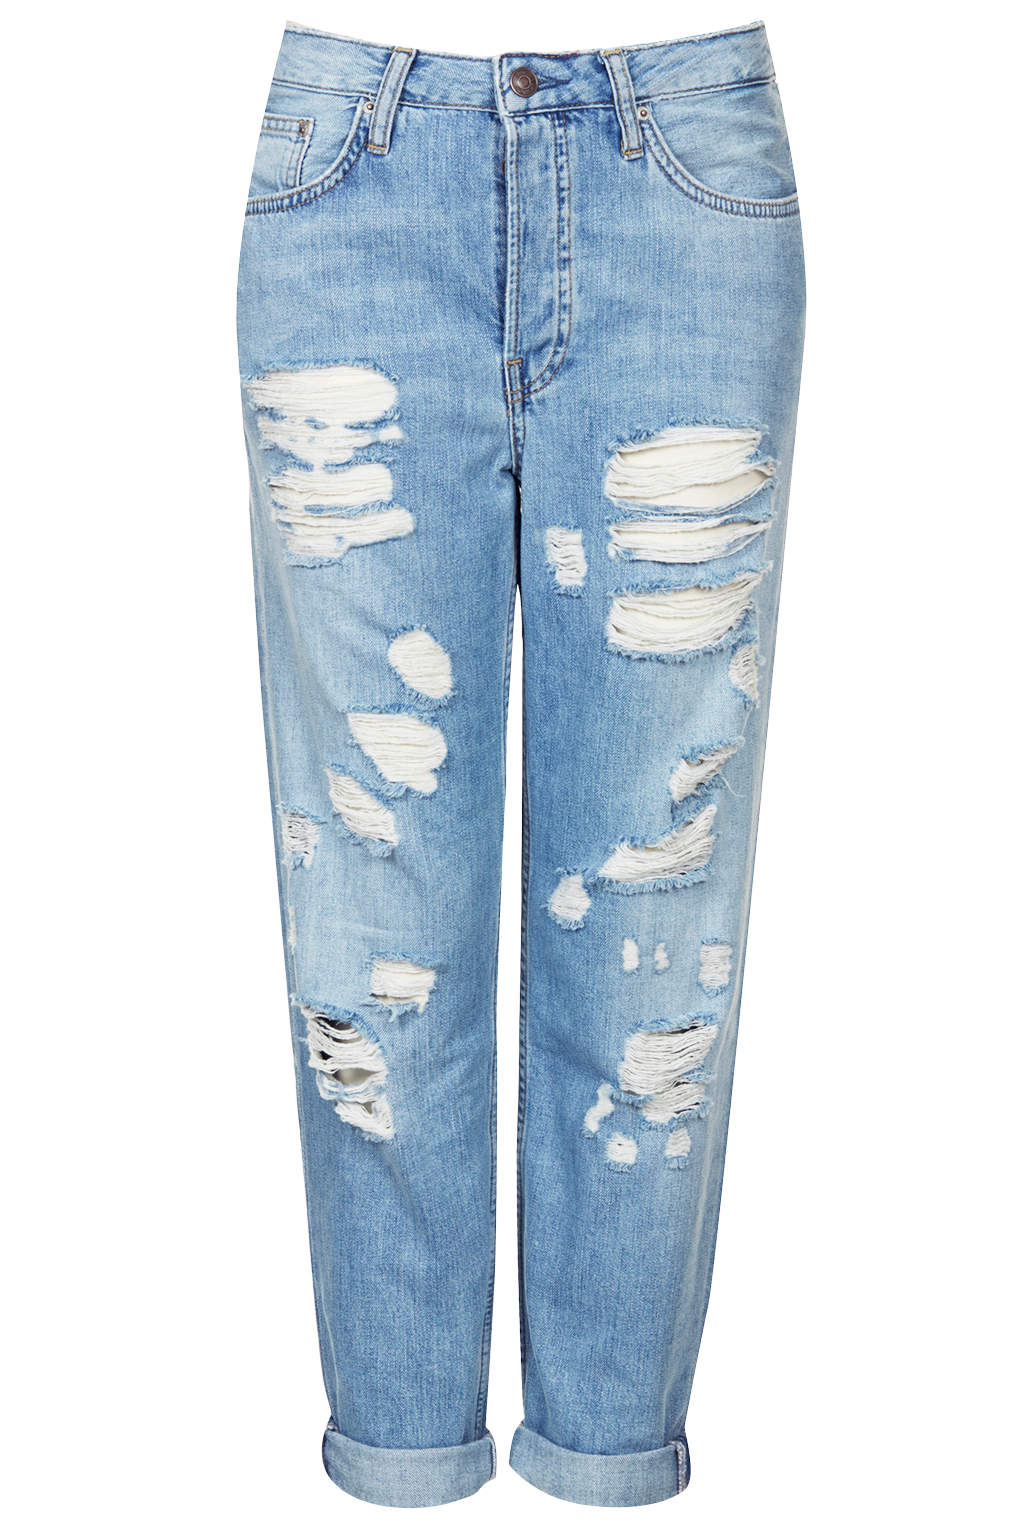 Topshop Moto Pretty Bleached Ripped Hayden Jeans in Blue (BLEACH STONE ...